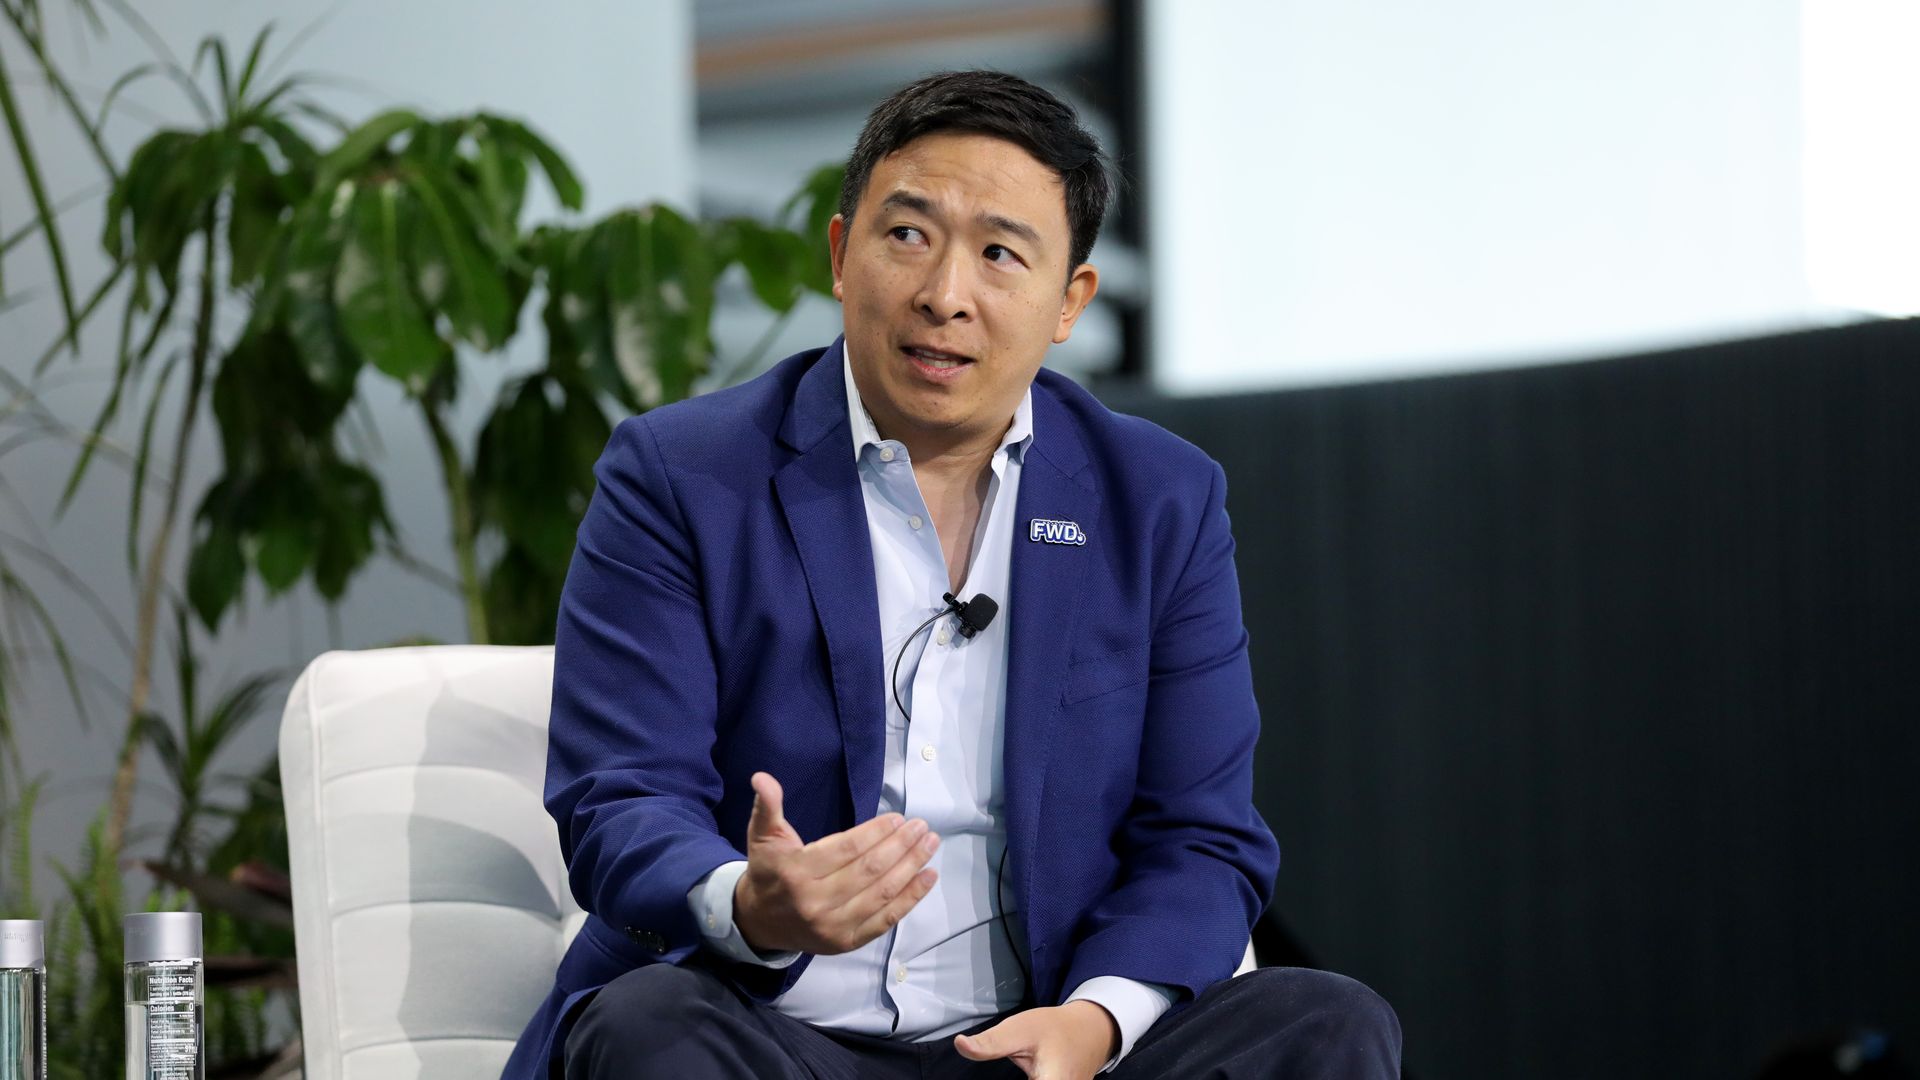  Andrew Yang participates in the "From Government to Corporations: The Urgent Need for AAPI Leadership" panel during the TAAF Heritage Month Summit at The Glasshouse on May 05, 2023 in New York City.